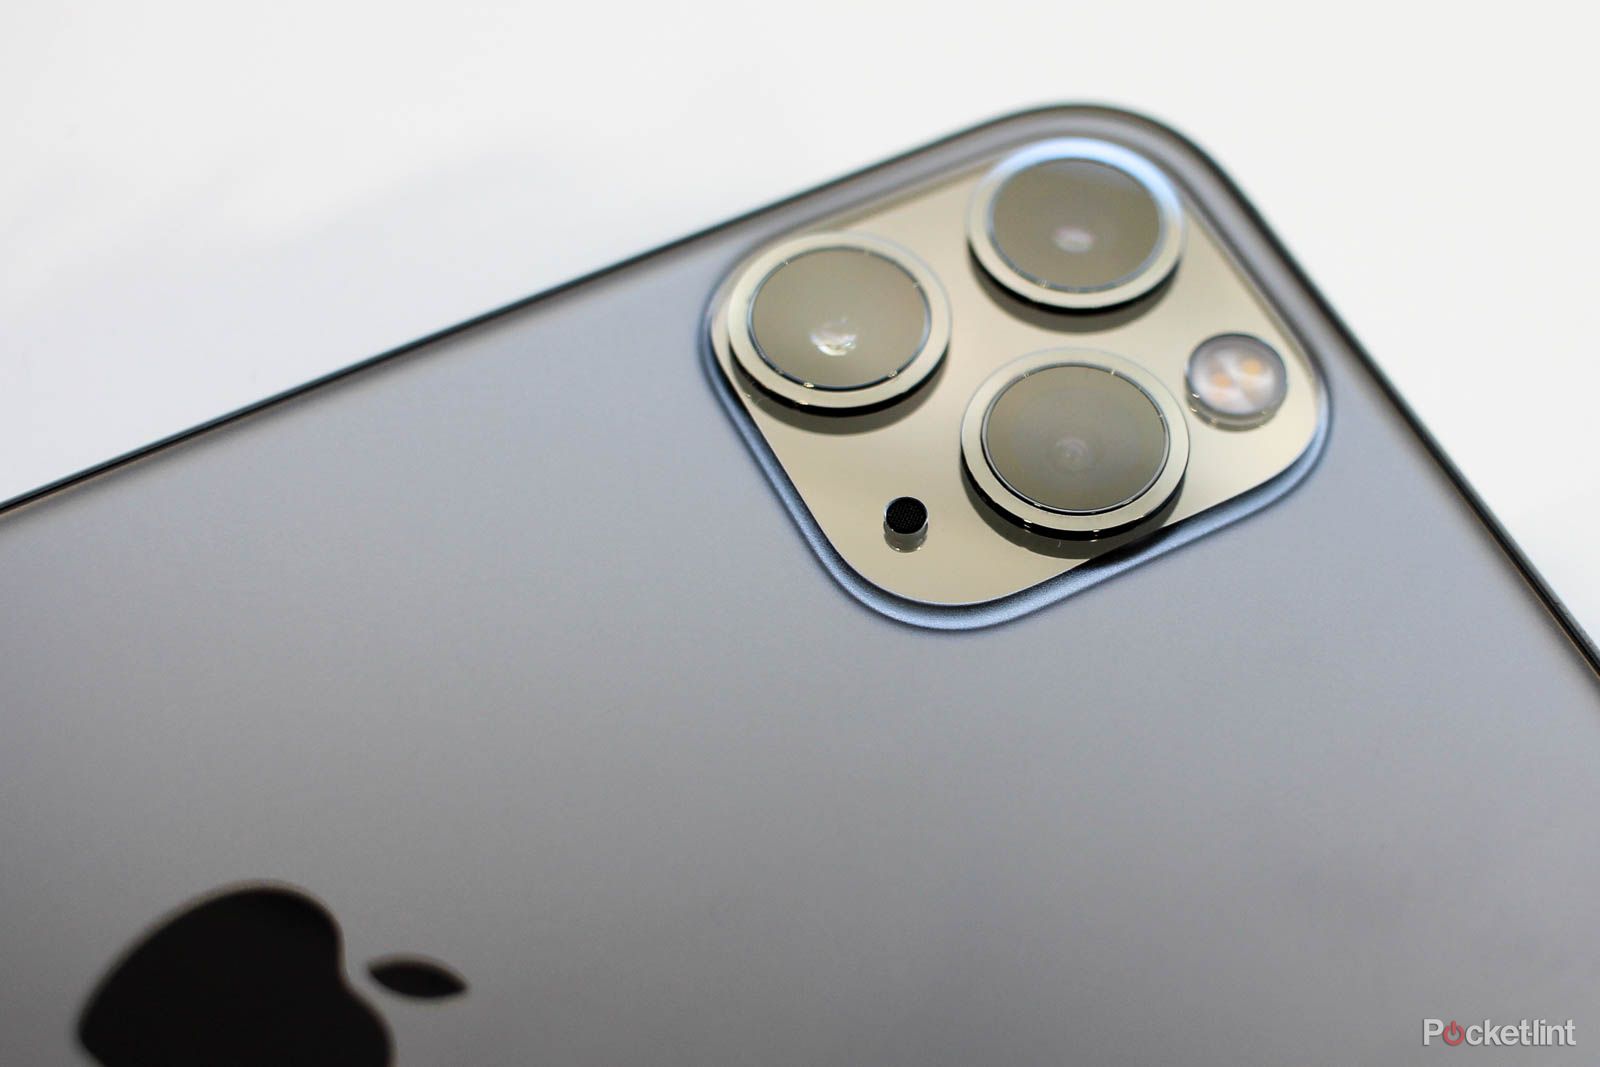 iPhone 12 could record 4K 120fps video, even 240fps photo 1